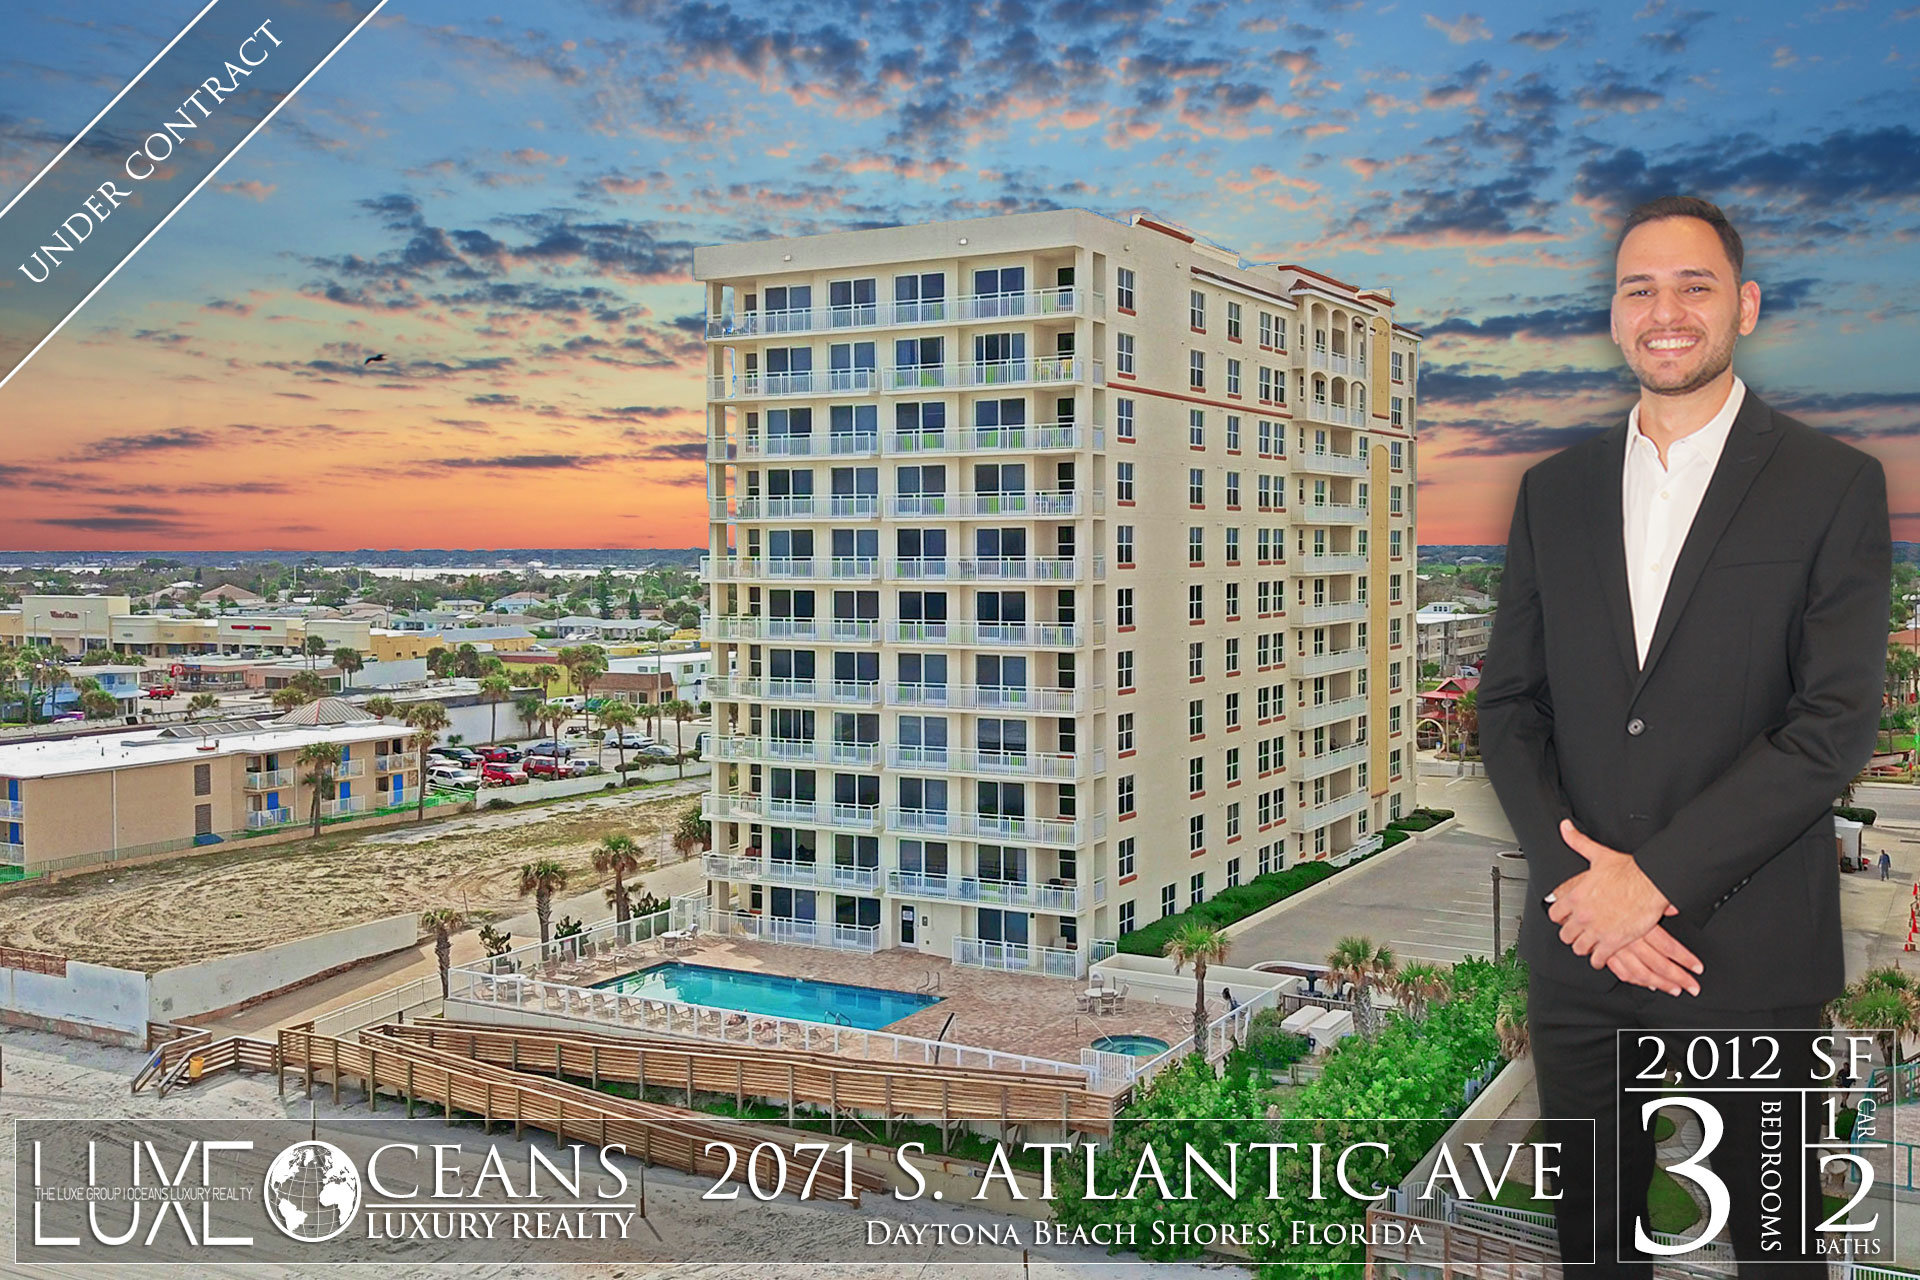 Opus Condos For Sale Oceanfront Real Estate at 2071 S Atlantic Ave Daytona Beach Shores, FL Under Contract 